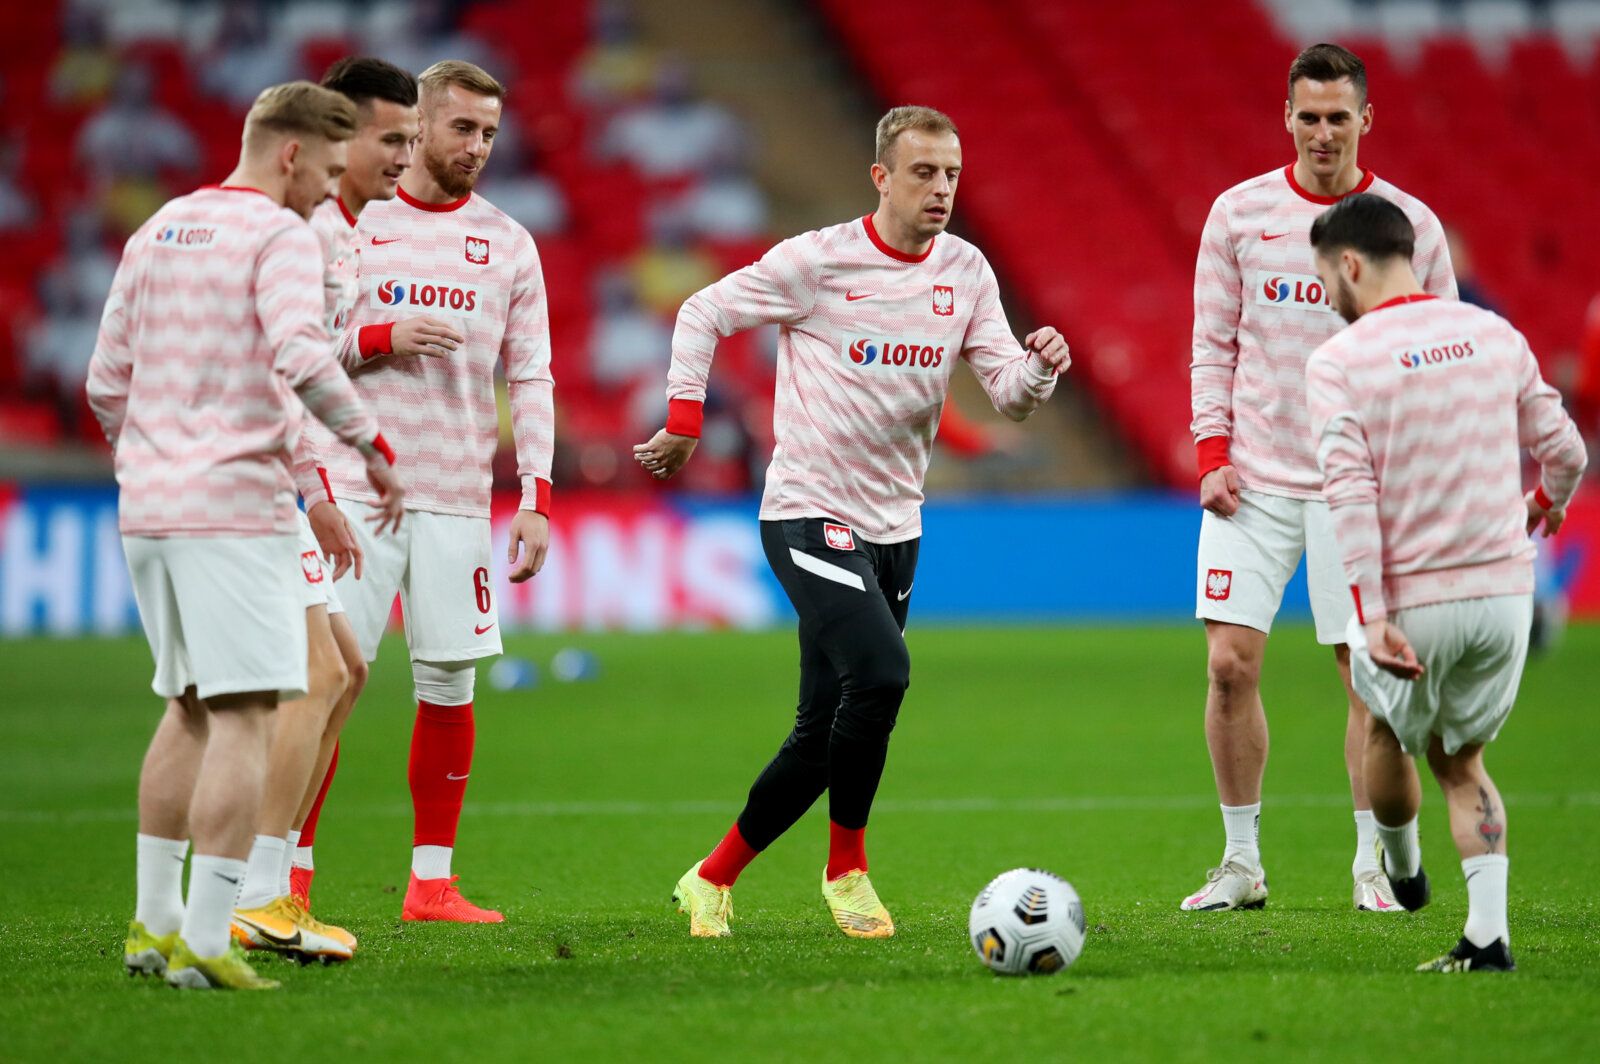 Soccer Football - World Cup Qualifiers Europe - Group I - England v Poland - Wembley Stadium, London, Britain - March 31, 2021 Poland's Kamil Grosicki and teammates during the warm up before the match Pool via REUTERS/Catherine Ivill